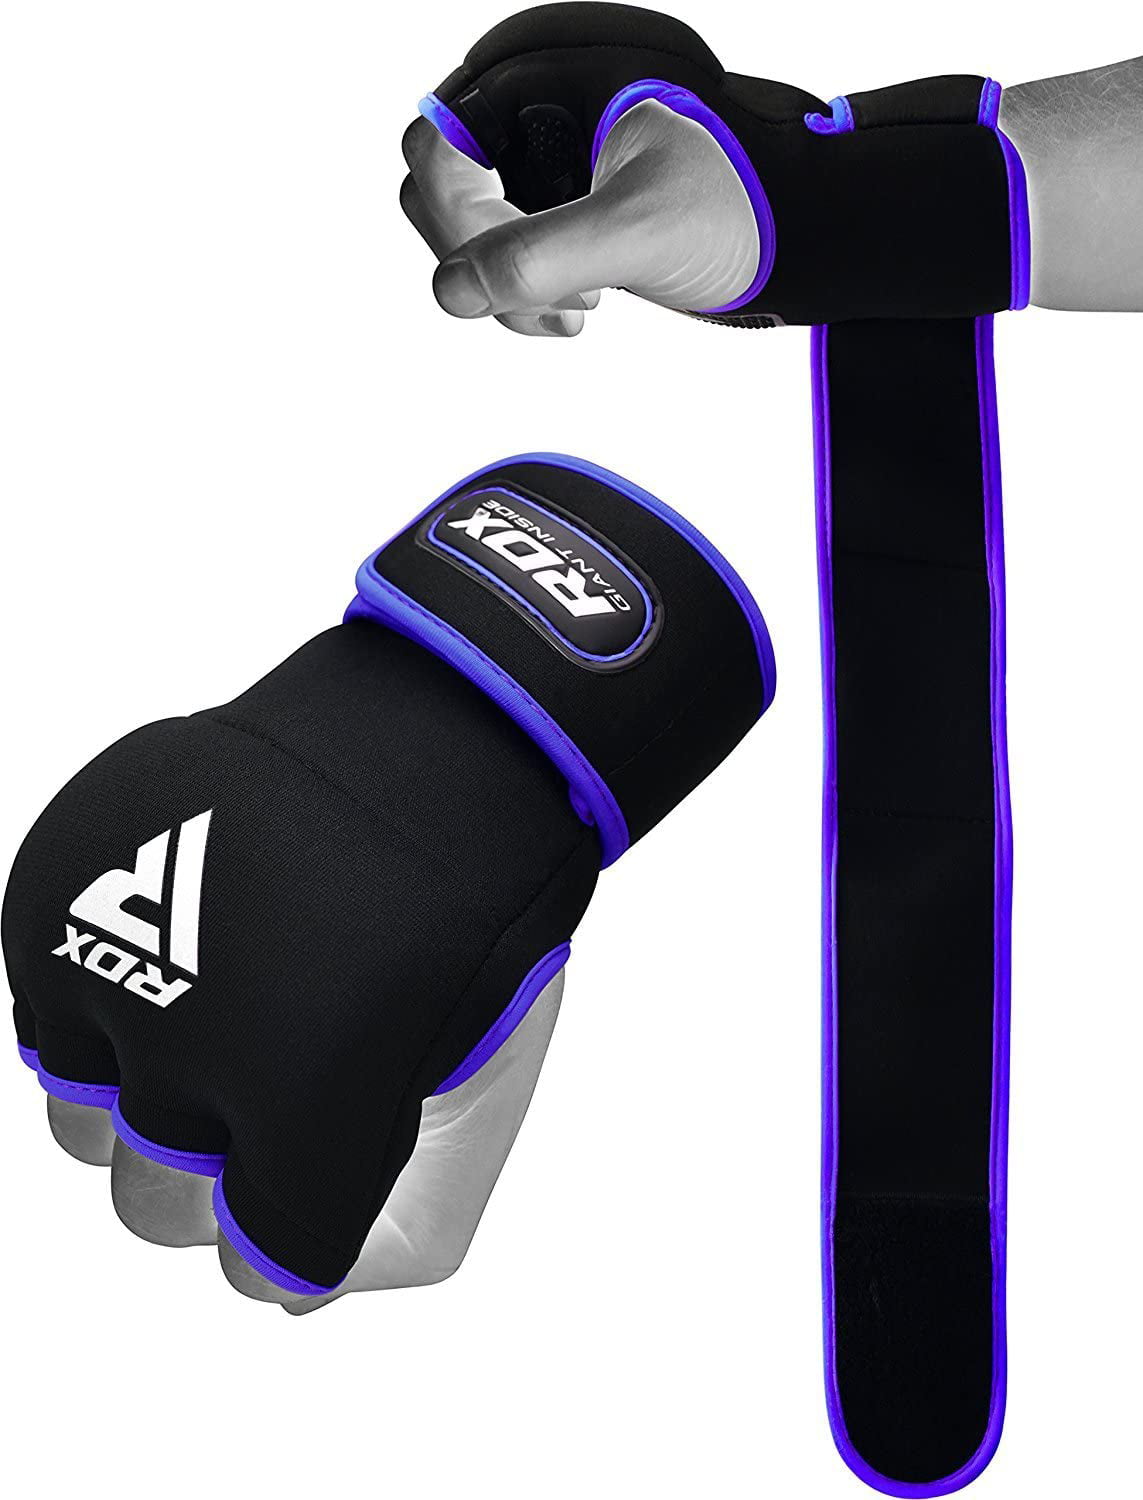 EVEROX Boxing Inner Gloves Quick Hand wraps Punch Bag Training MMA Martial Arts 